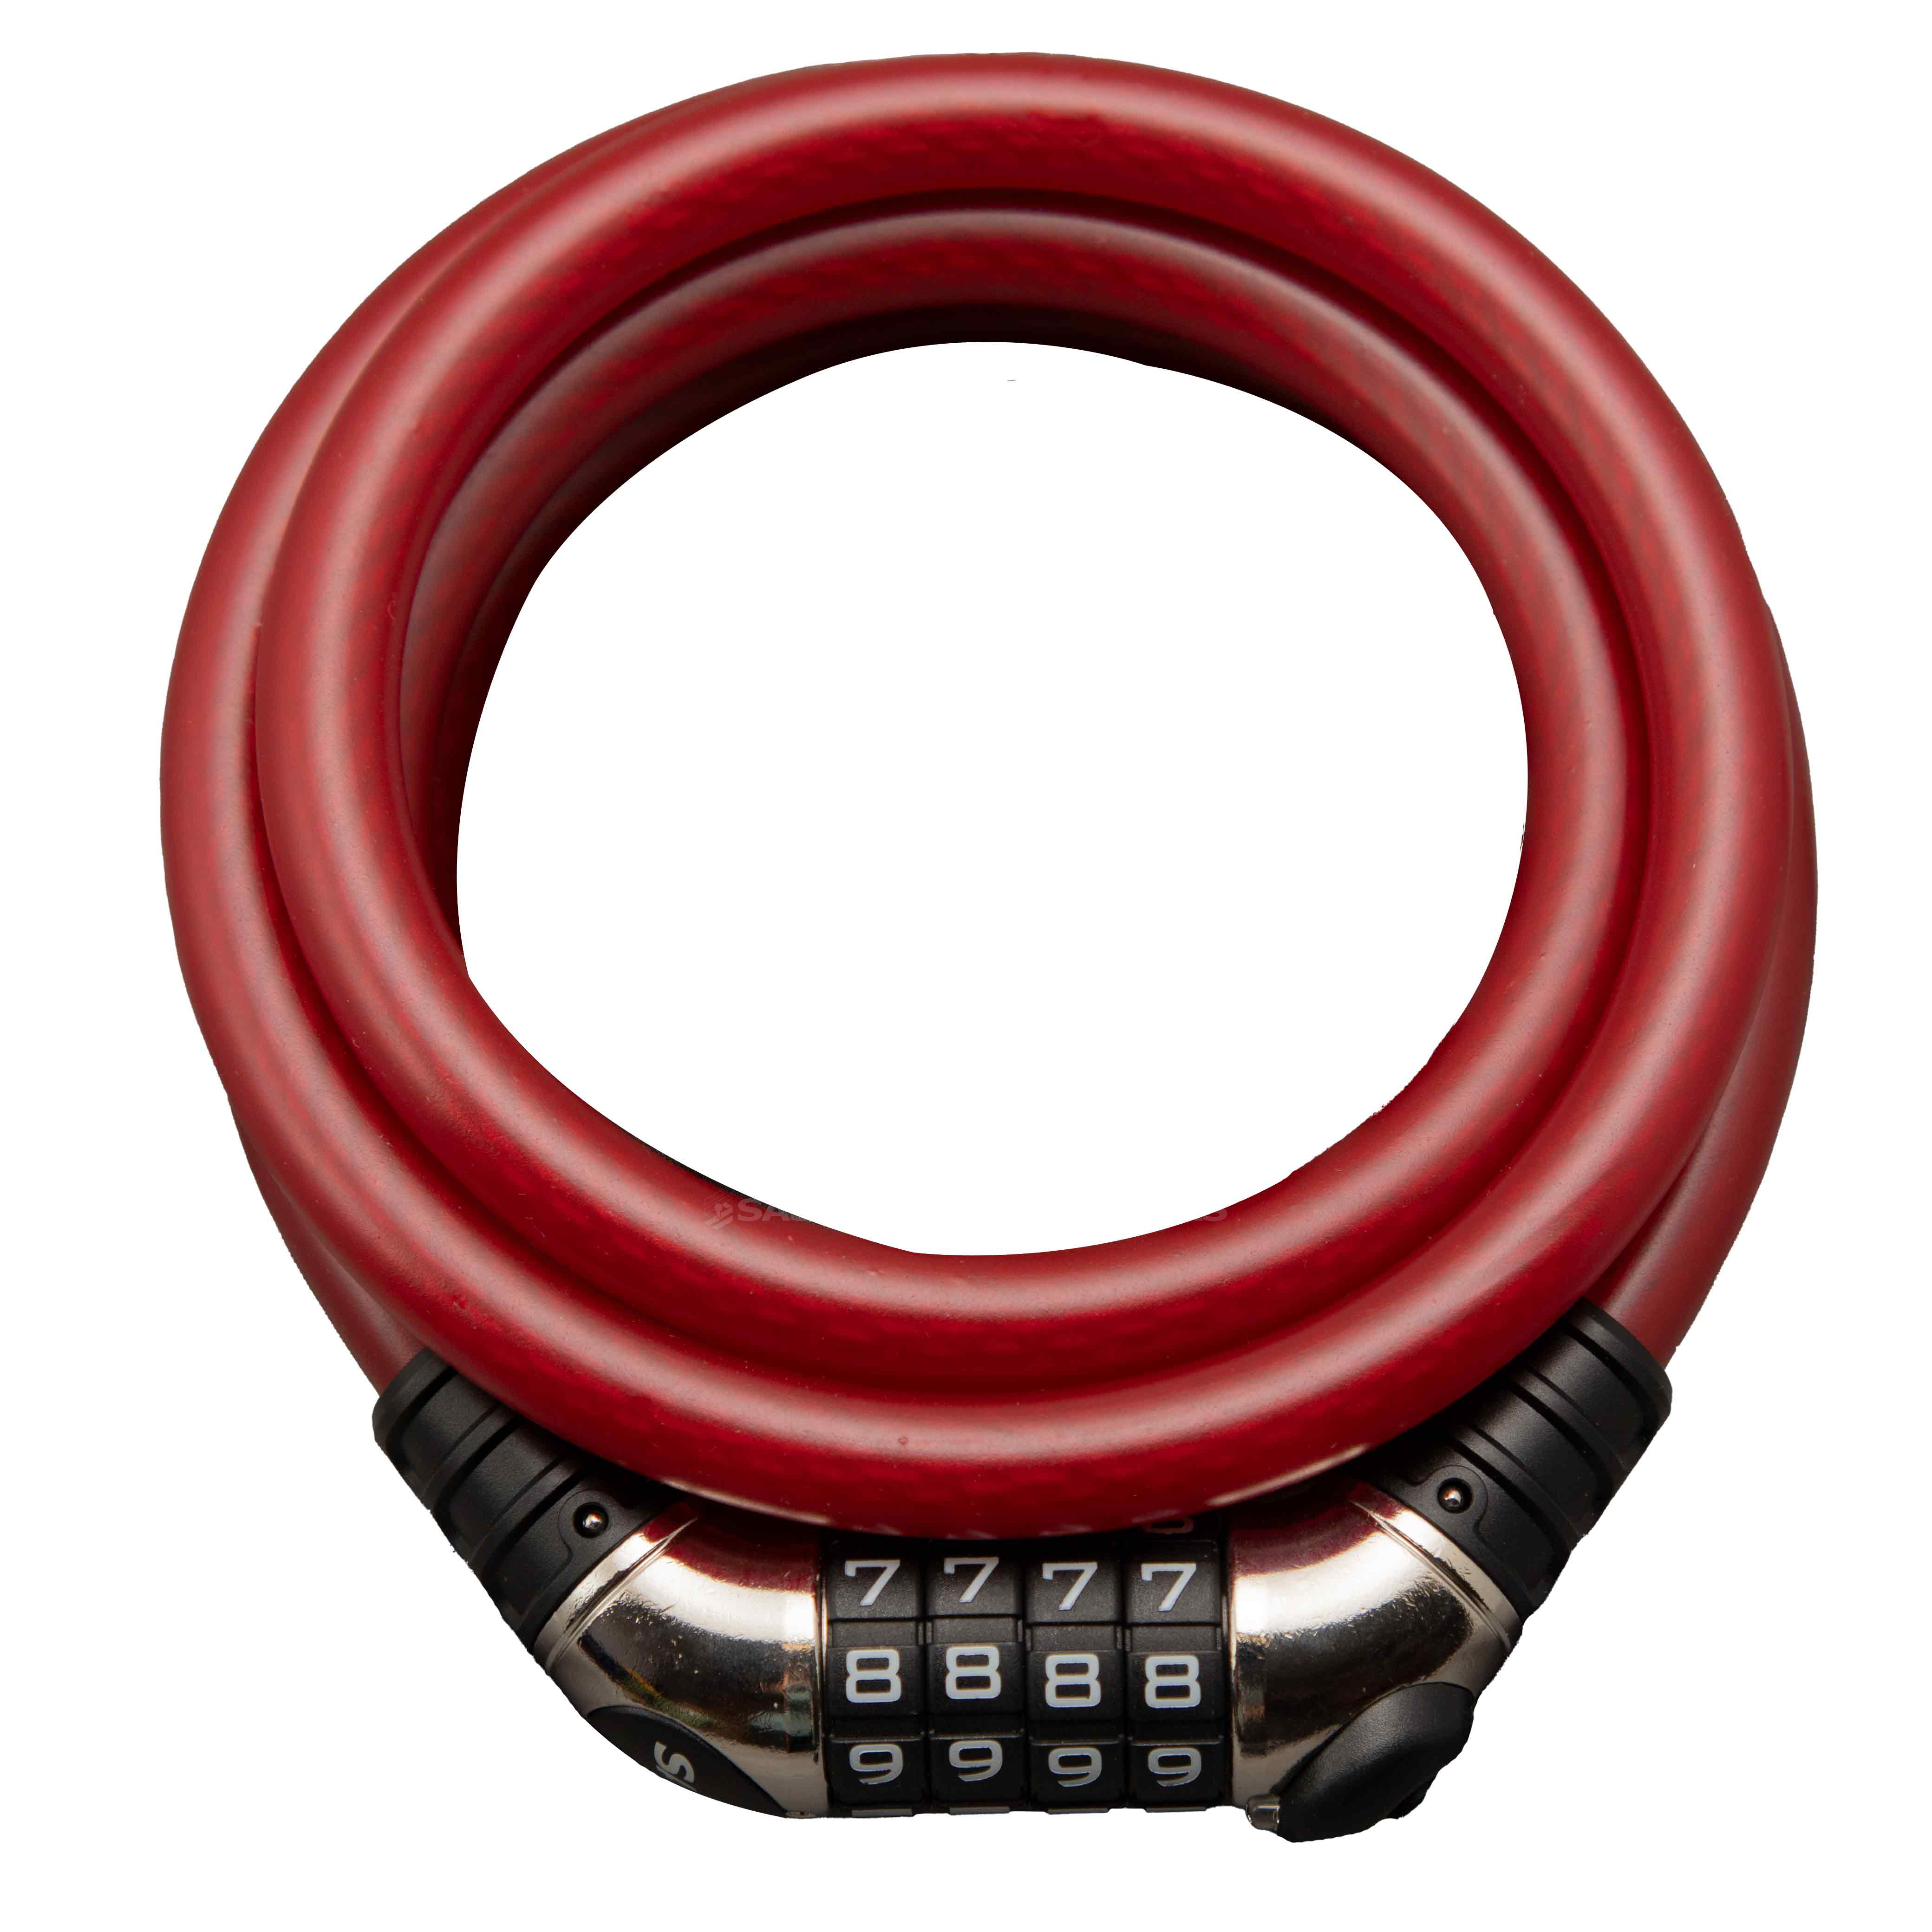 Steel Braided cable shown with combi Lock